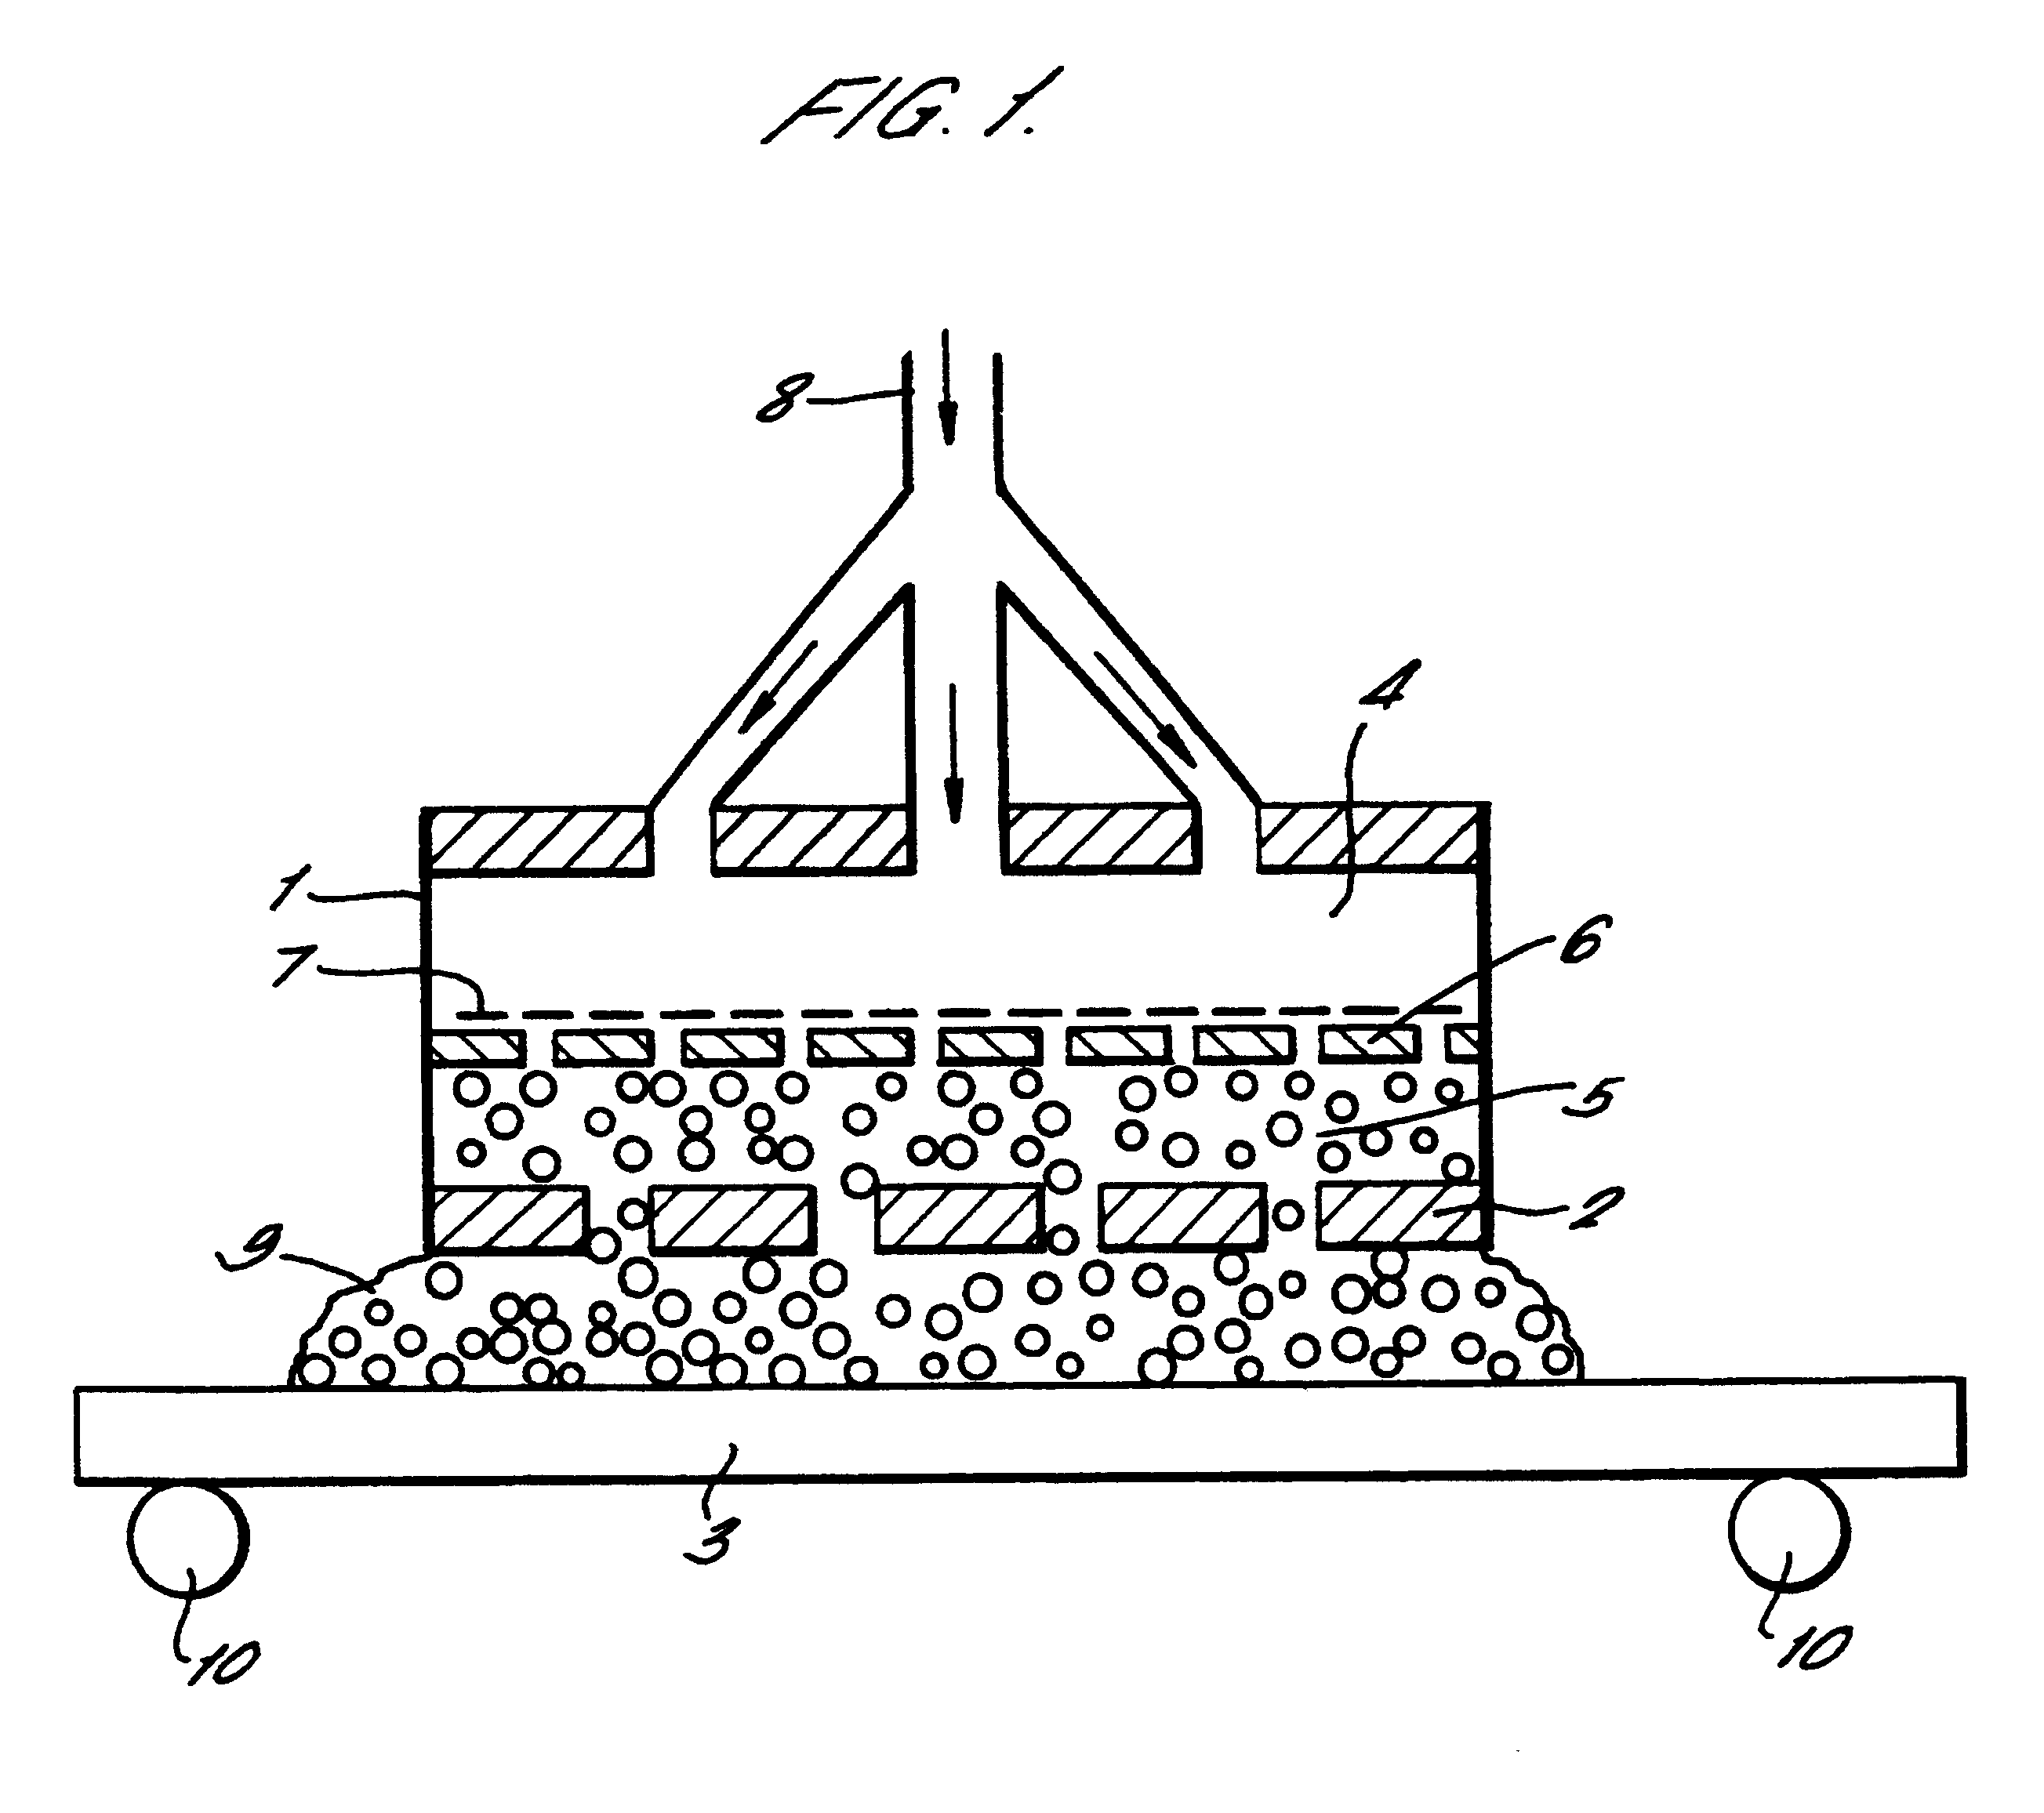 Process and apparatus for cleaning and/or coating metal surfaces using electro-plasma technology